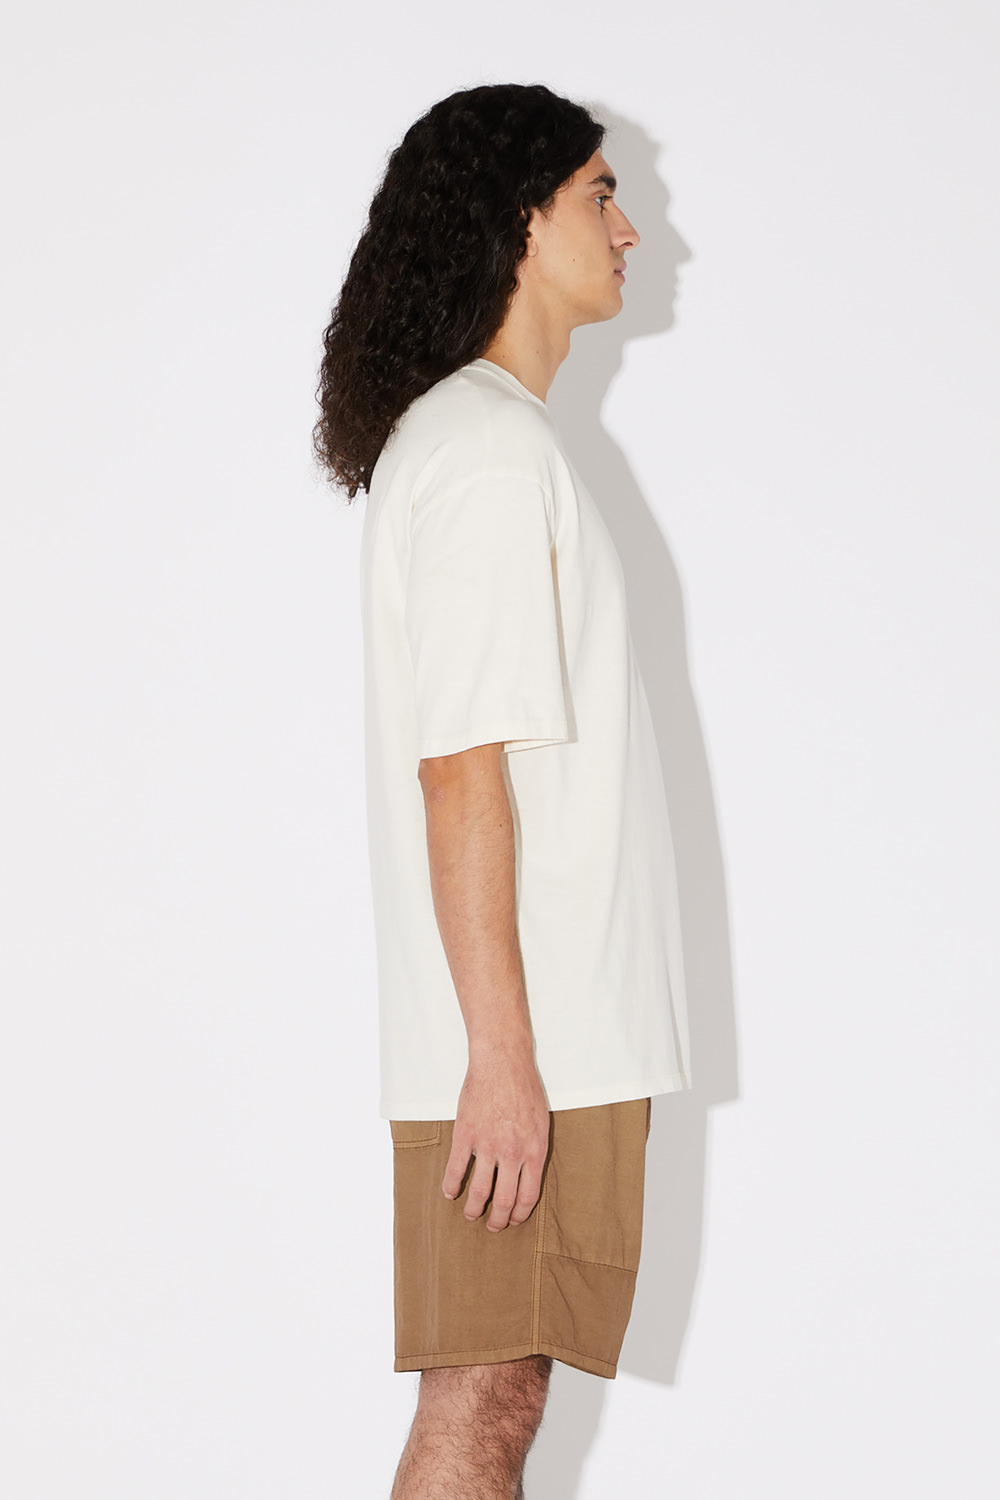 AMISH: CREW NECK T-SHIRT WITH MICRO LOGO